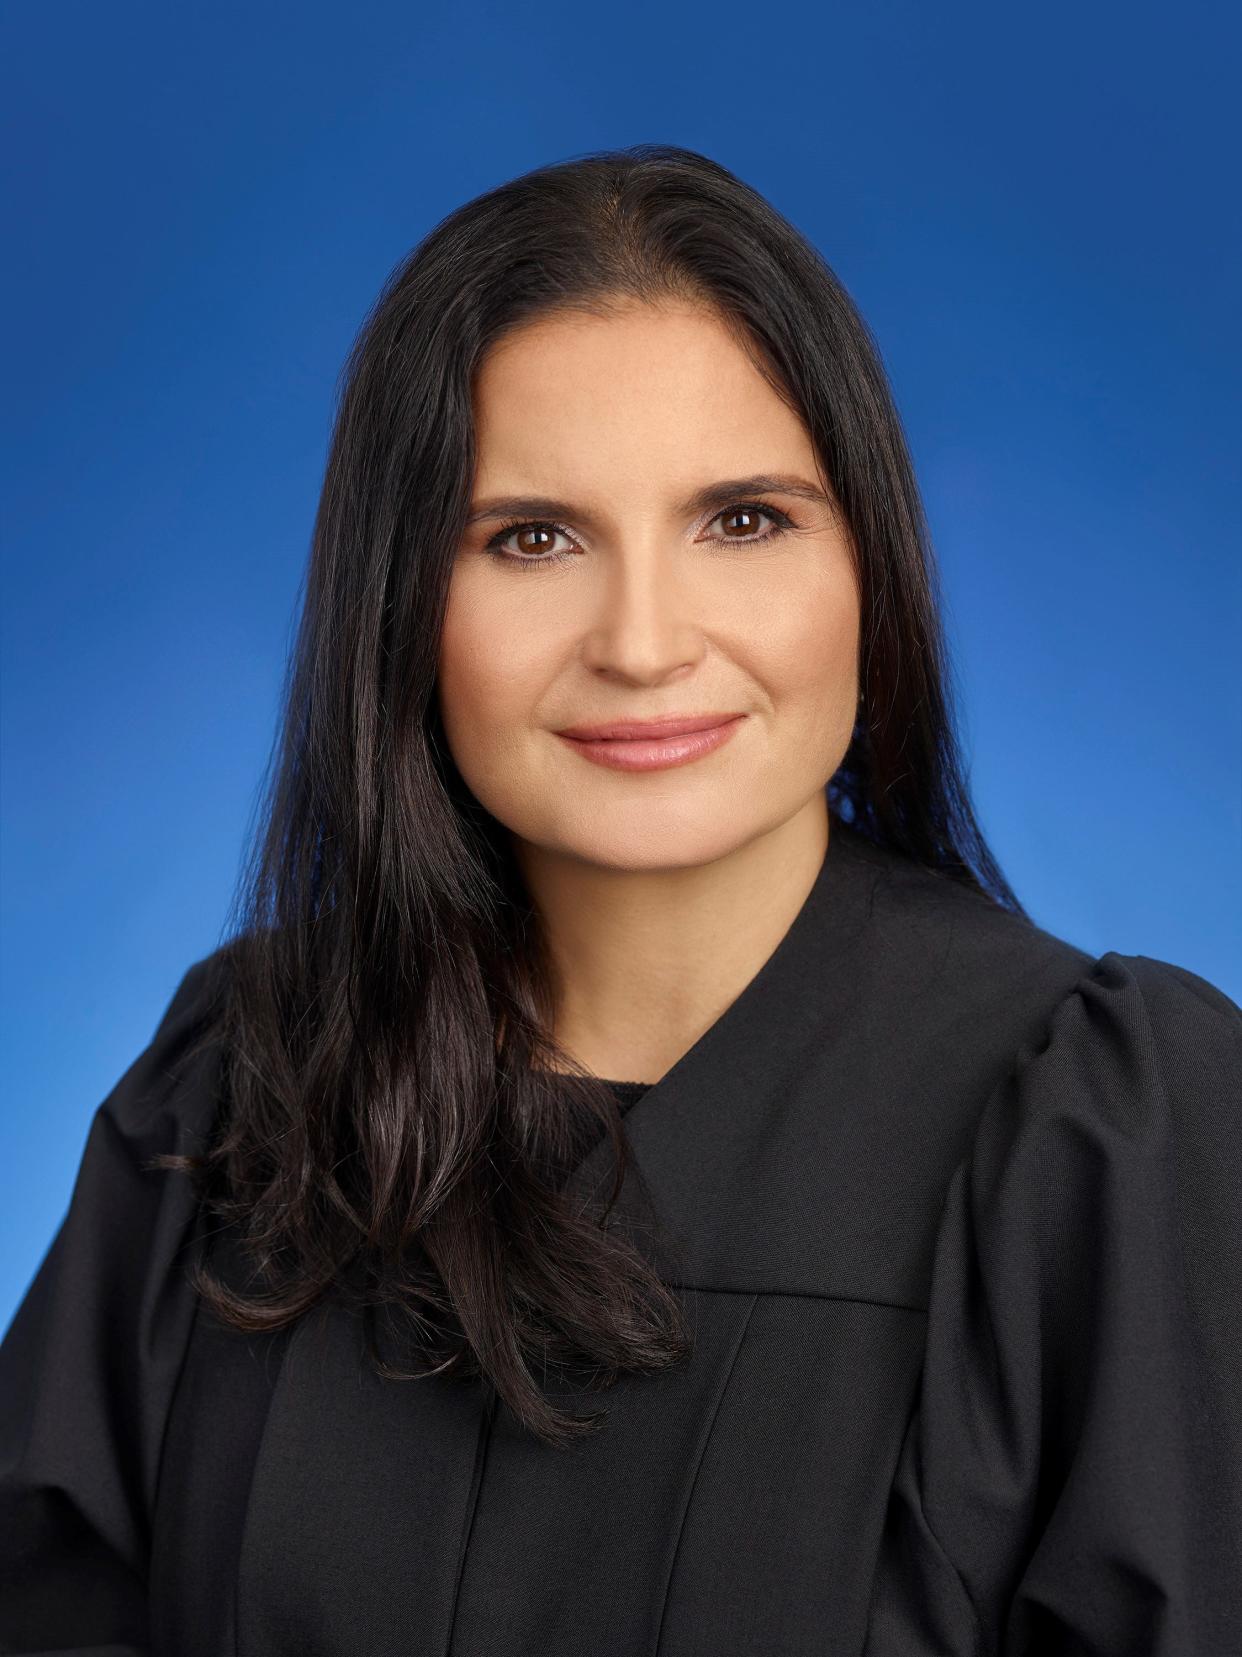 United States District Judge Aileen Cannon, of the Southern District of Florida, is pictured in this 2021 portrait.